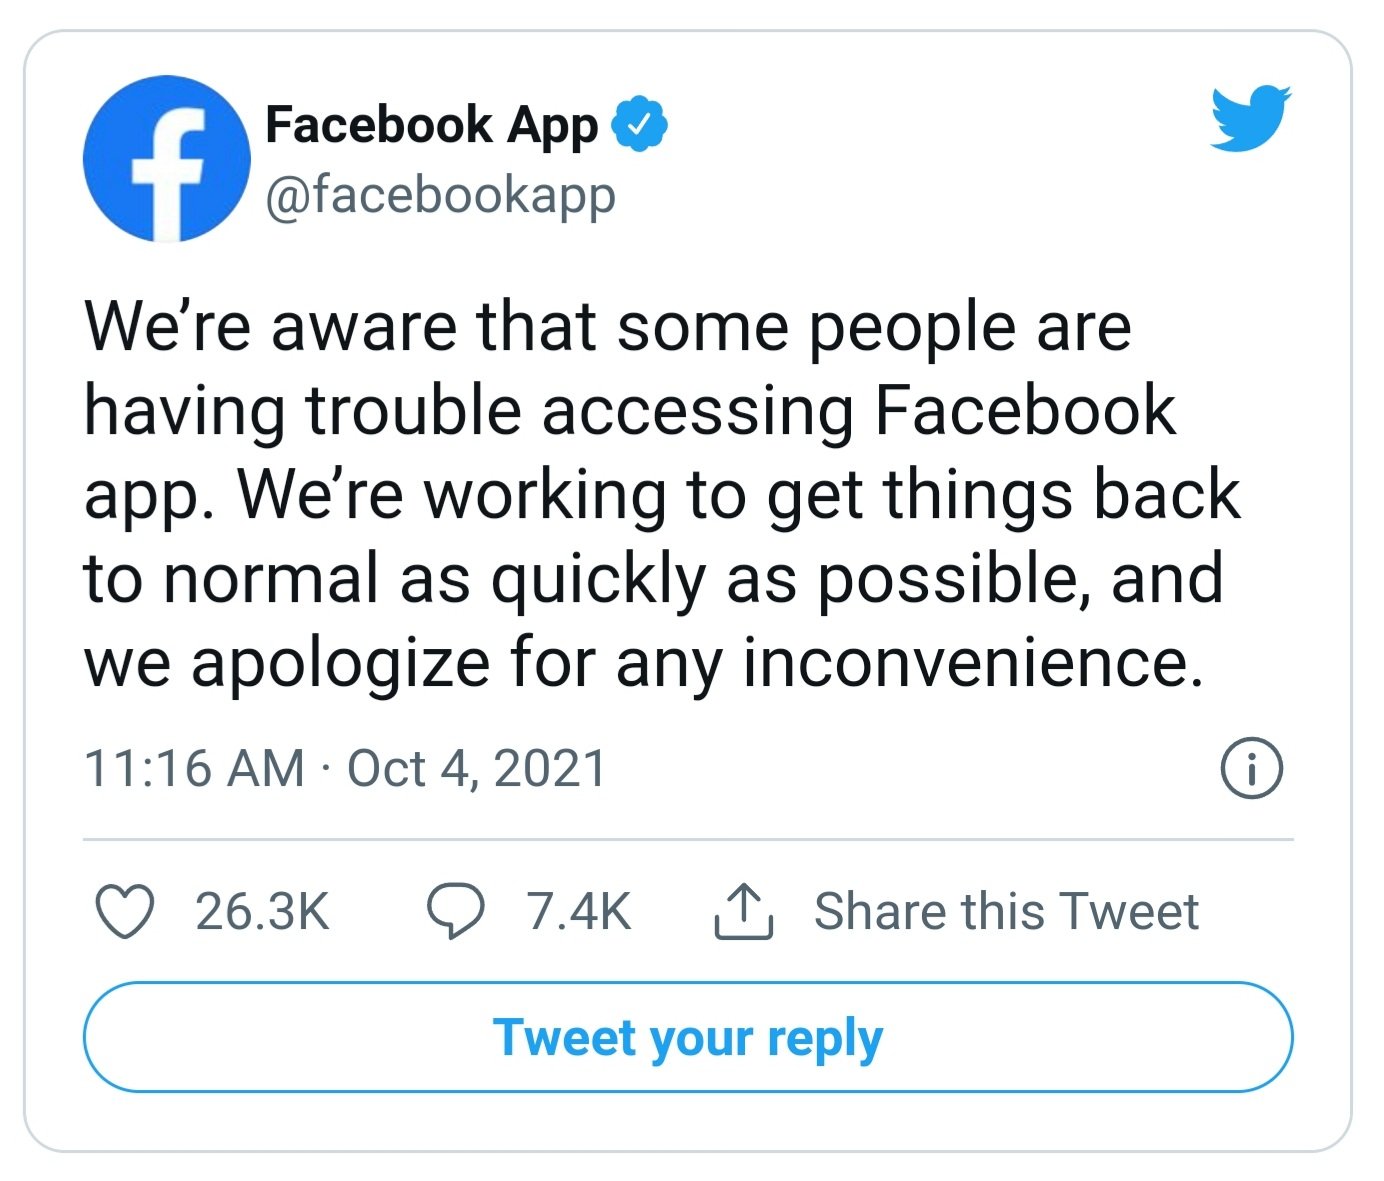 Facebook Down along with Instagram and WhatsApp